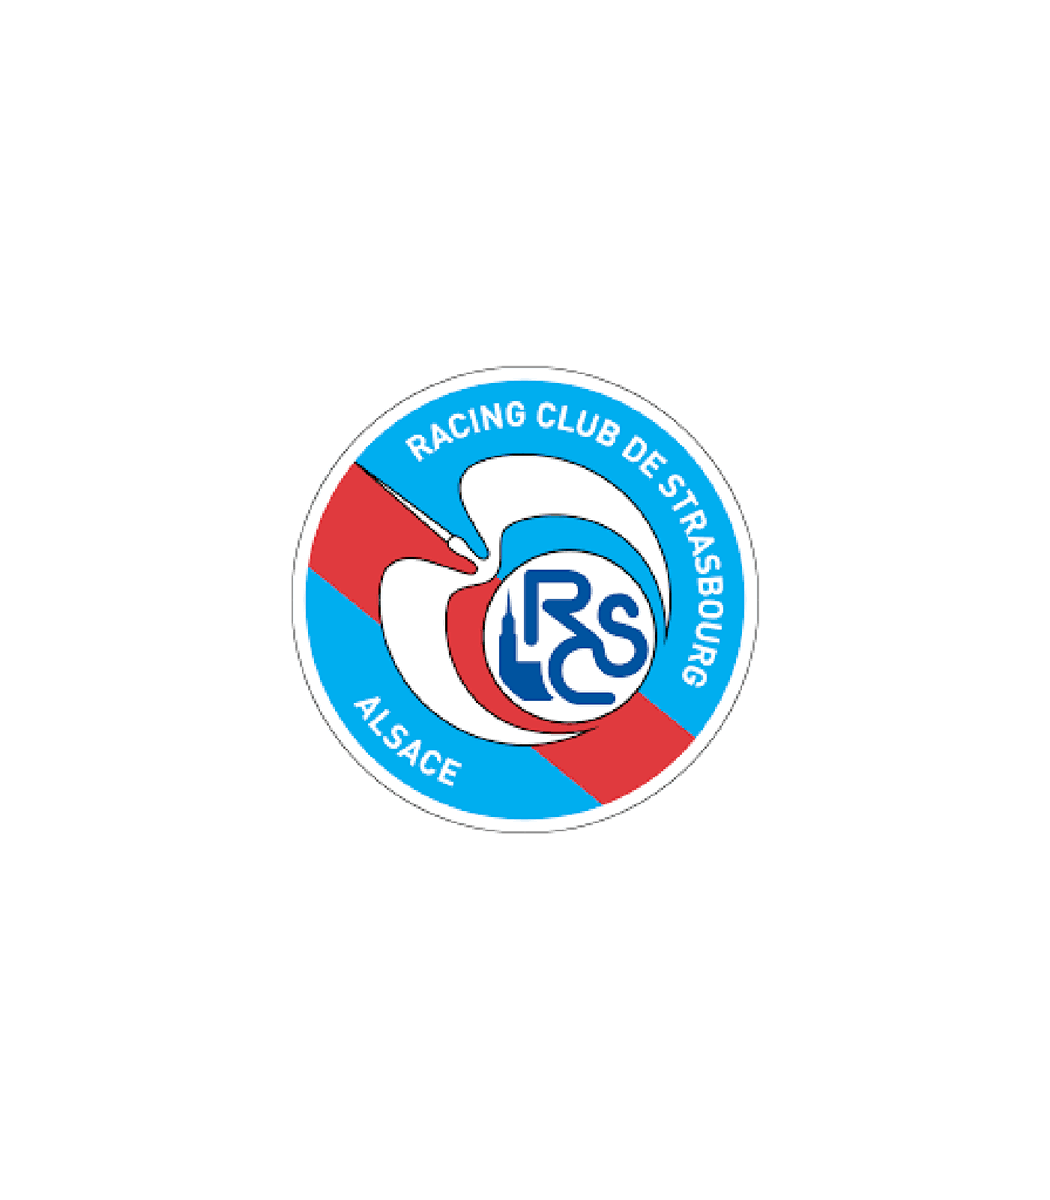 Racing Club de Strasbourg Alsace English on X: 🚨 𝐎𝐟𝐟𝐢𝐜𝐢𝐚𝐥  𝐬𝐭𝐚𝐭𝐞𝐦𝐞𝐧𝐭 BlueCo signs agreement to become the new shareholders of Racing  Club de Strasbourg Alsace! ➕ Read the full statement: ➡️